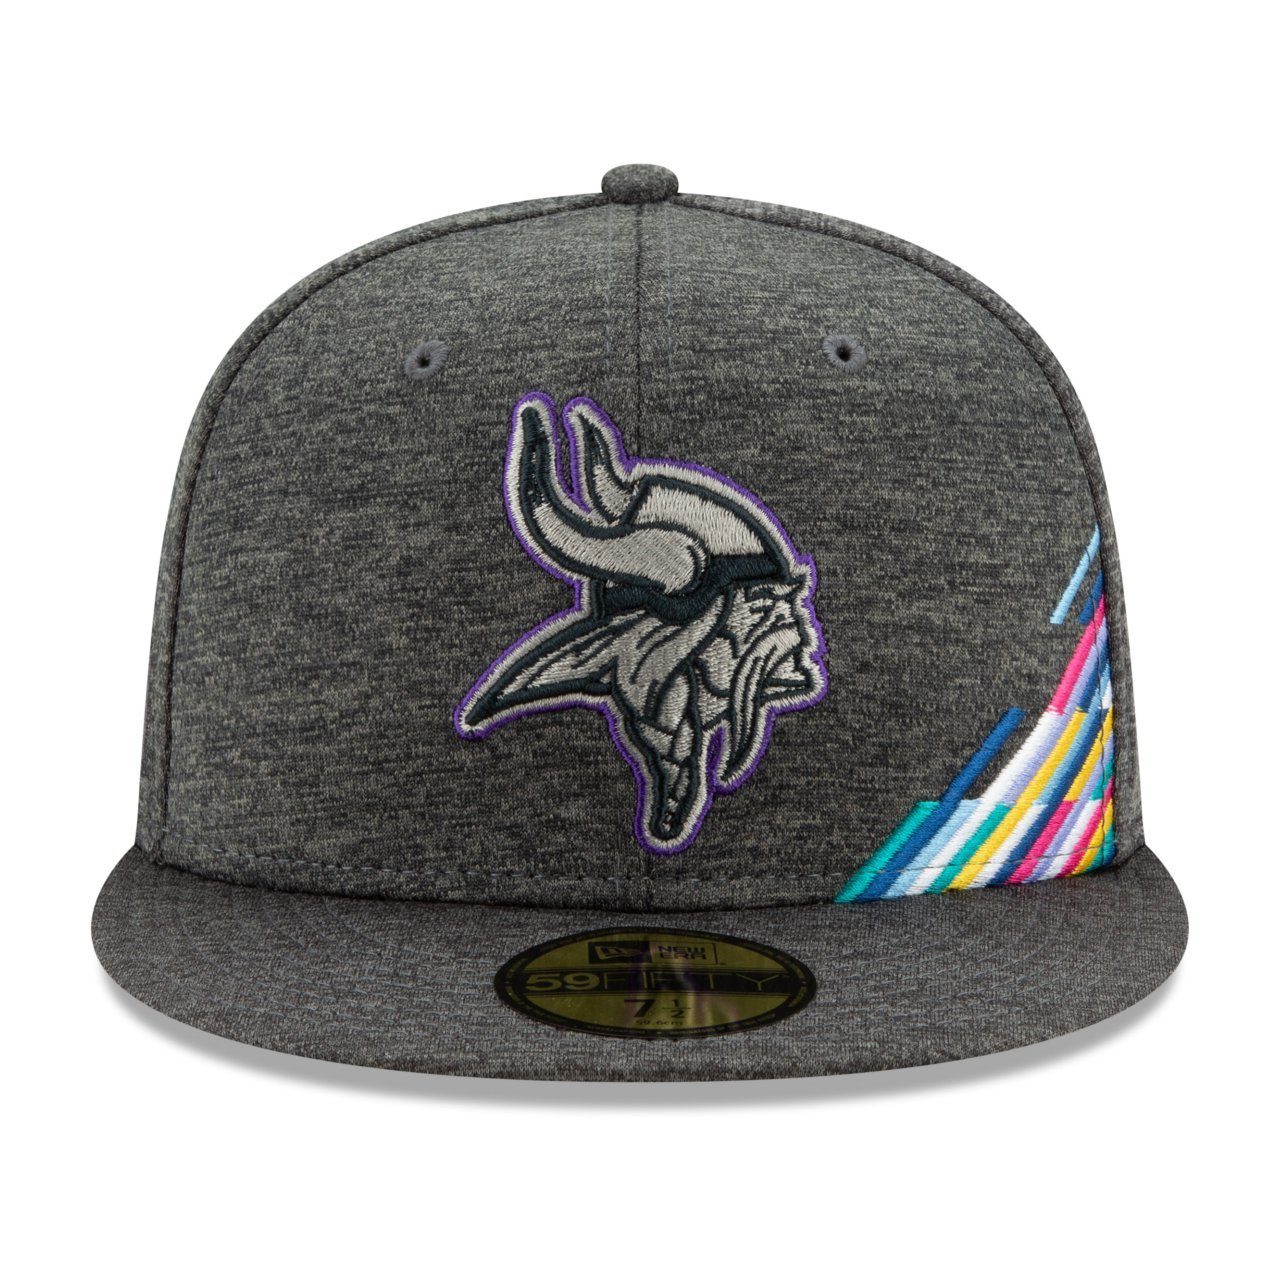 Vikings CATCH New Fitted CRUCIAL Teams Cap Minnesota 59Fifty NFL Era